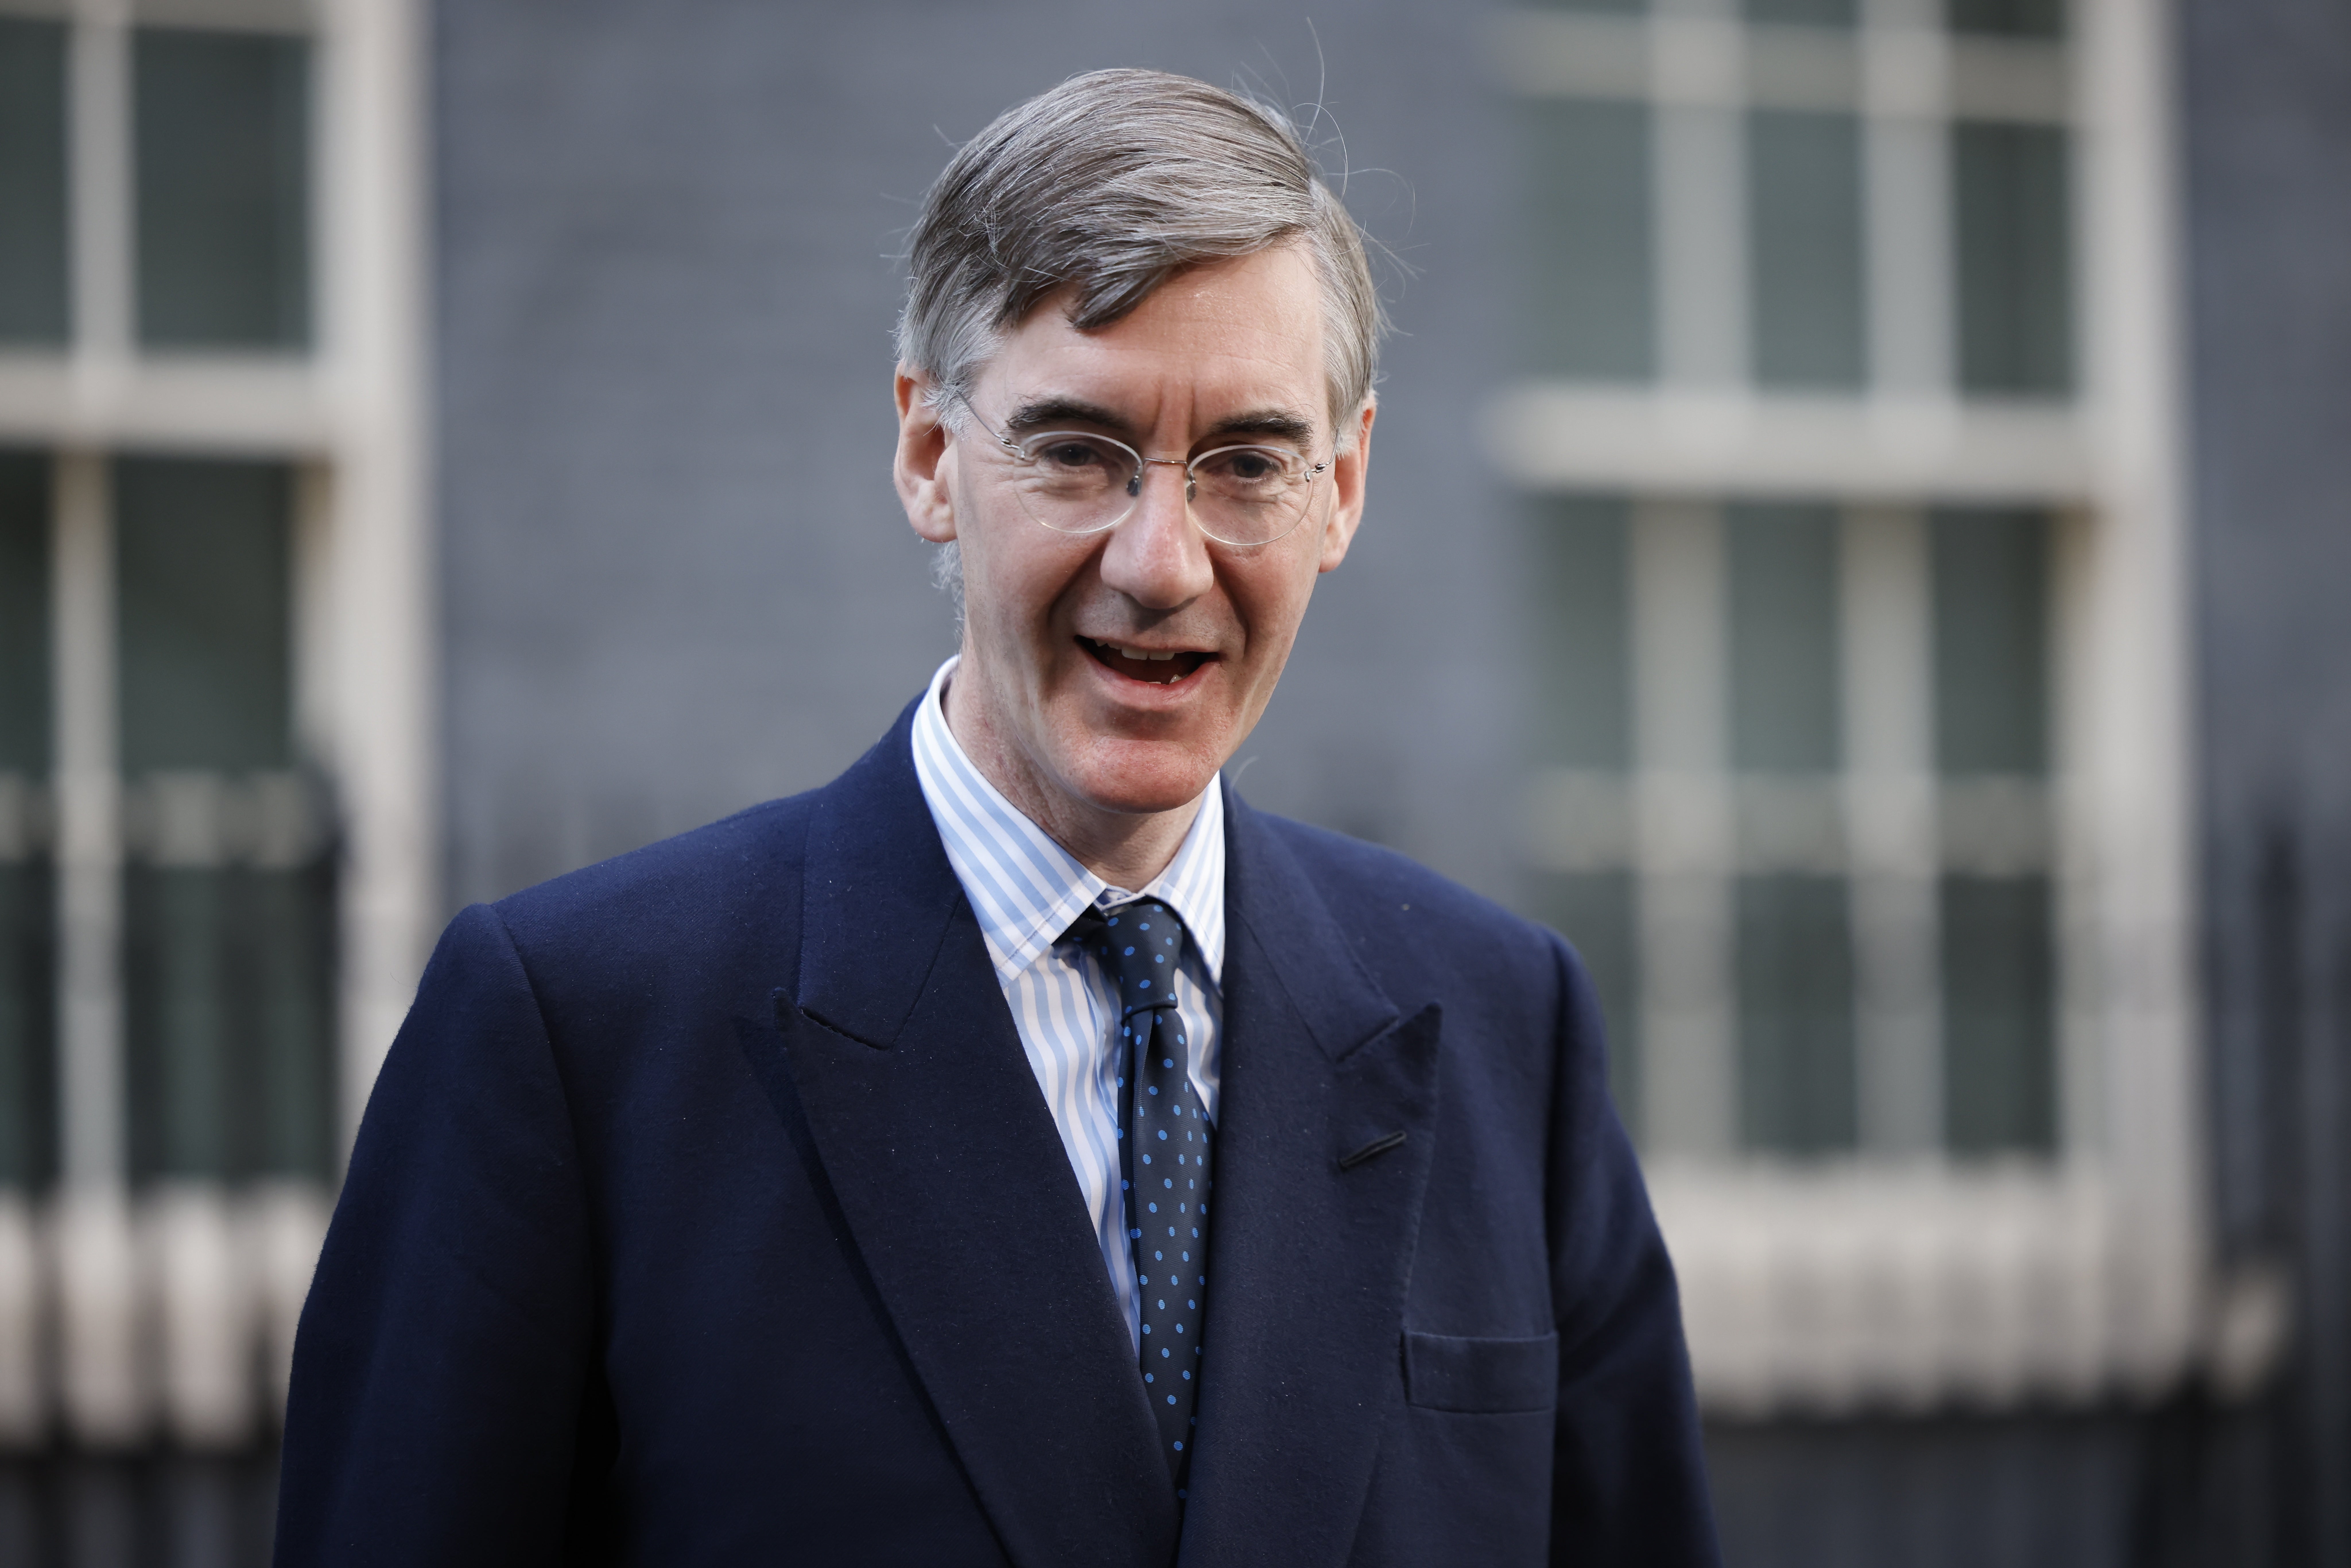 Their circumstance is a physically impossible experience for Mr Rees-Mogg